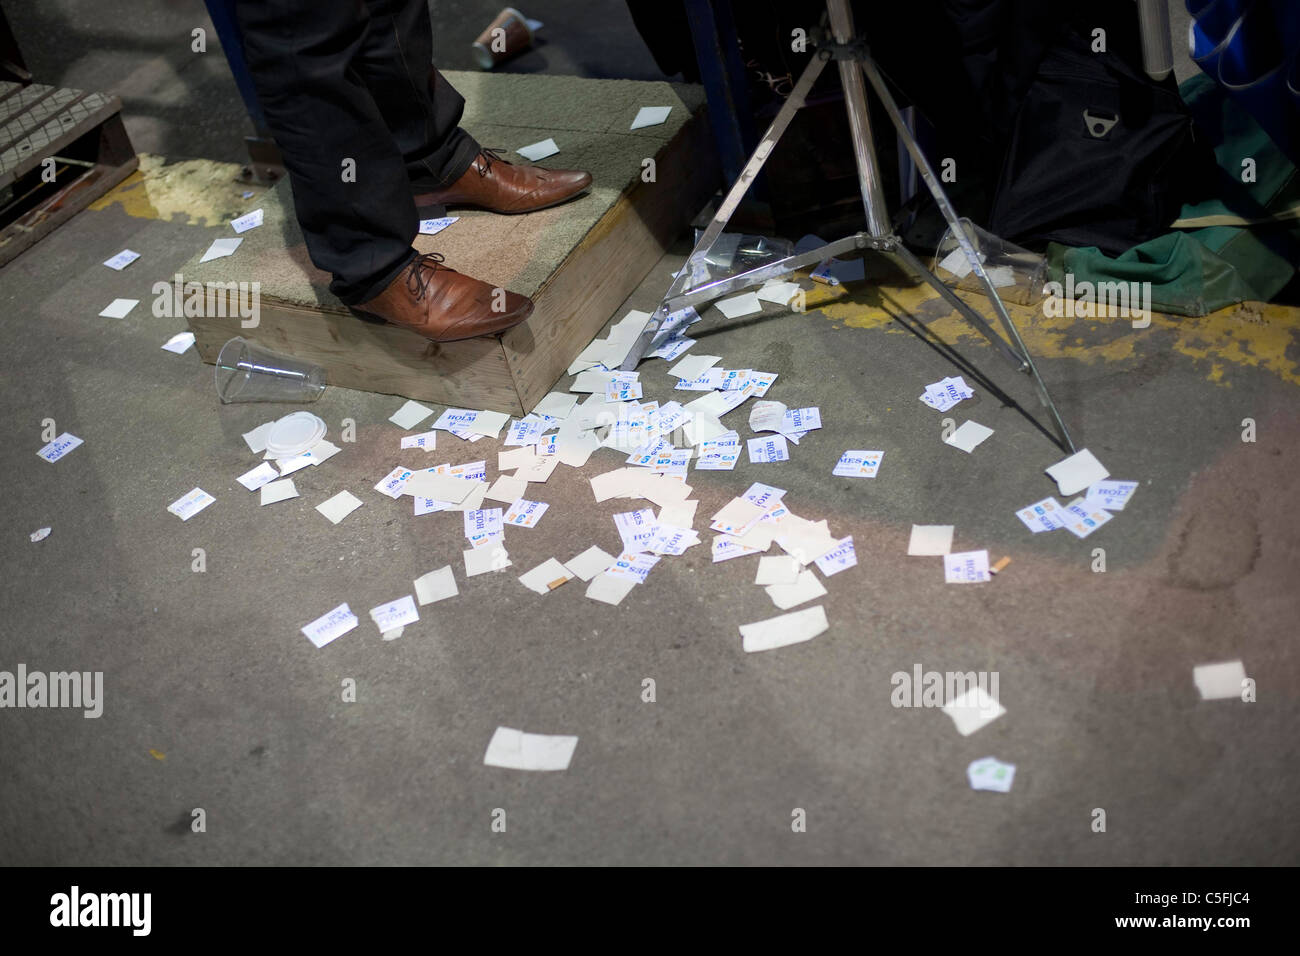 Disused betting slips at the feet of a bookmaker Stock Photo